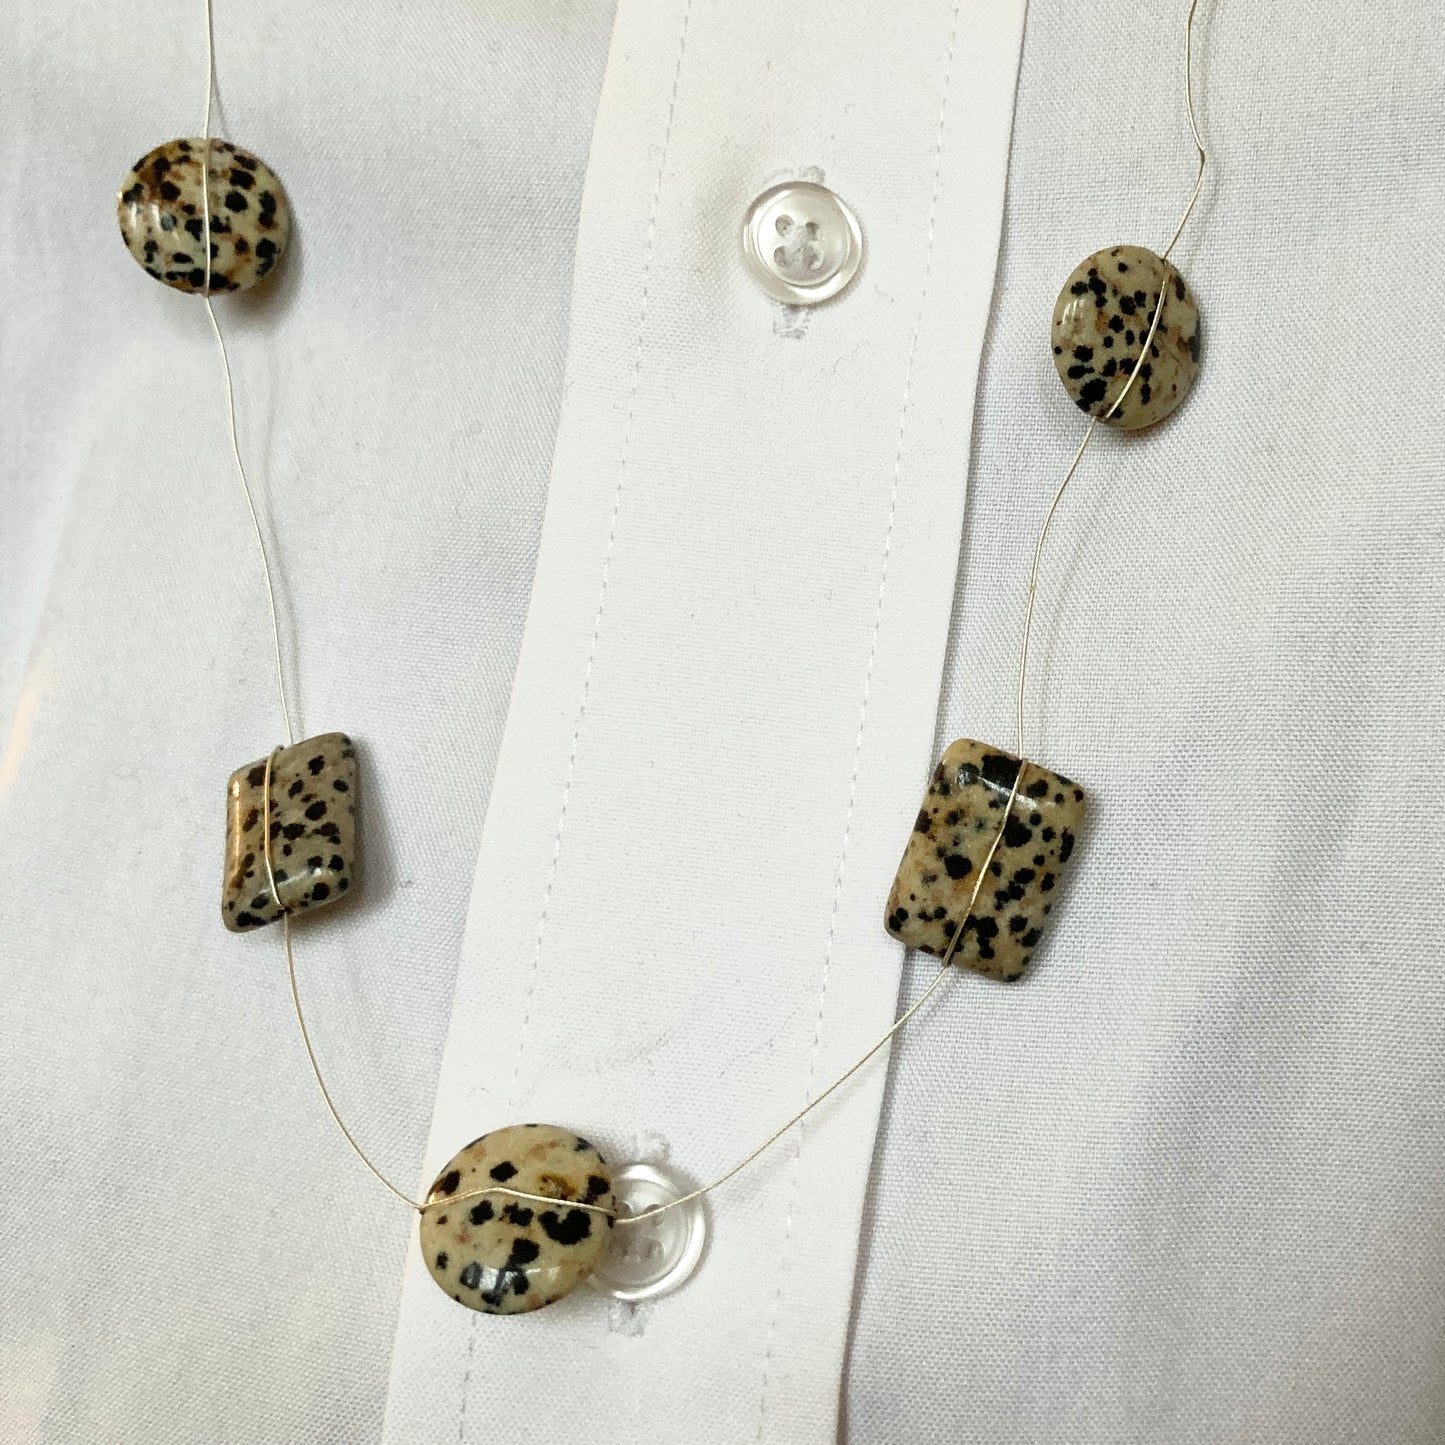 ECU of Dalmation Discs and Rectangles against a white button shirt 